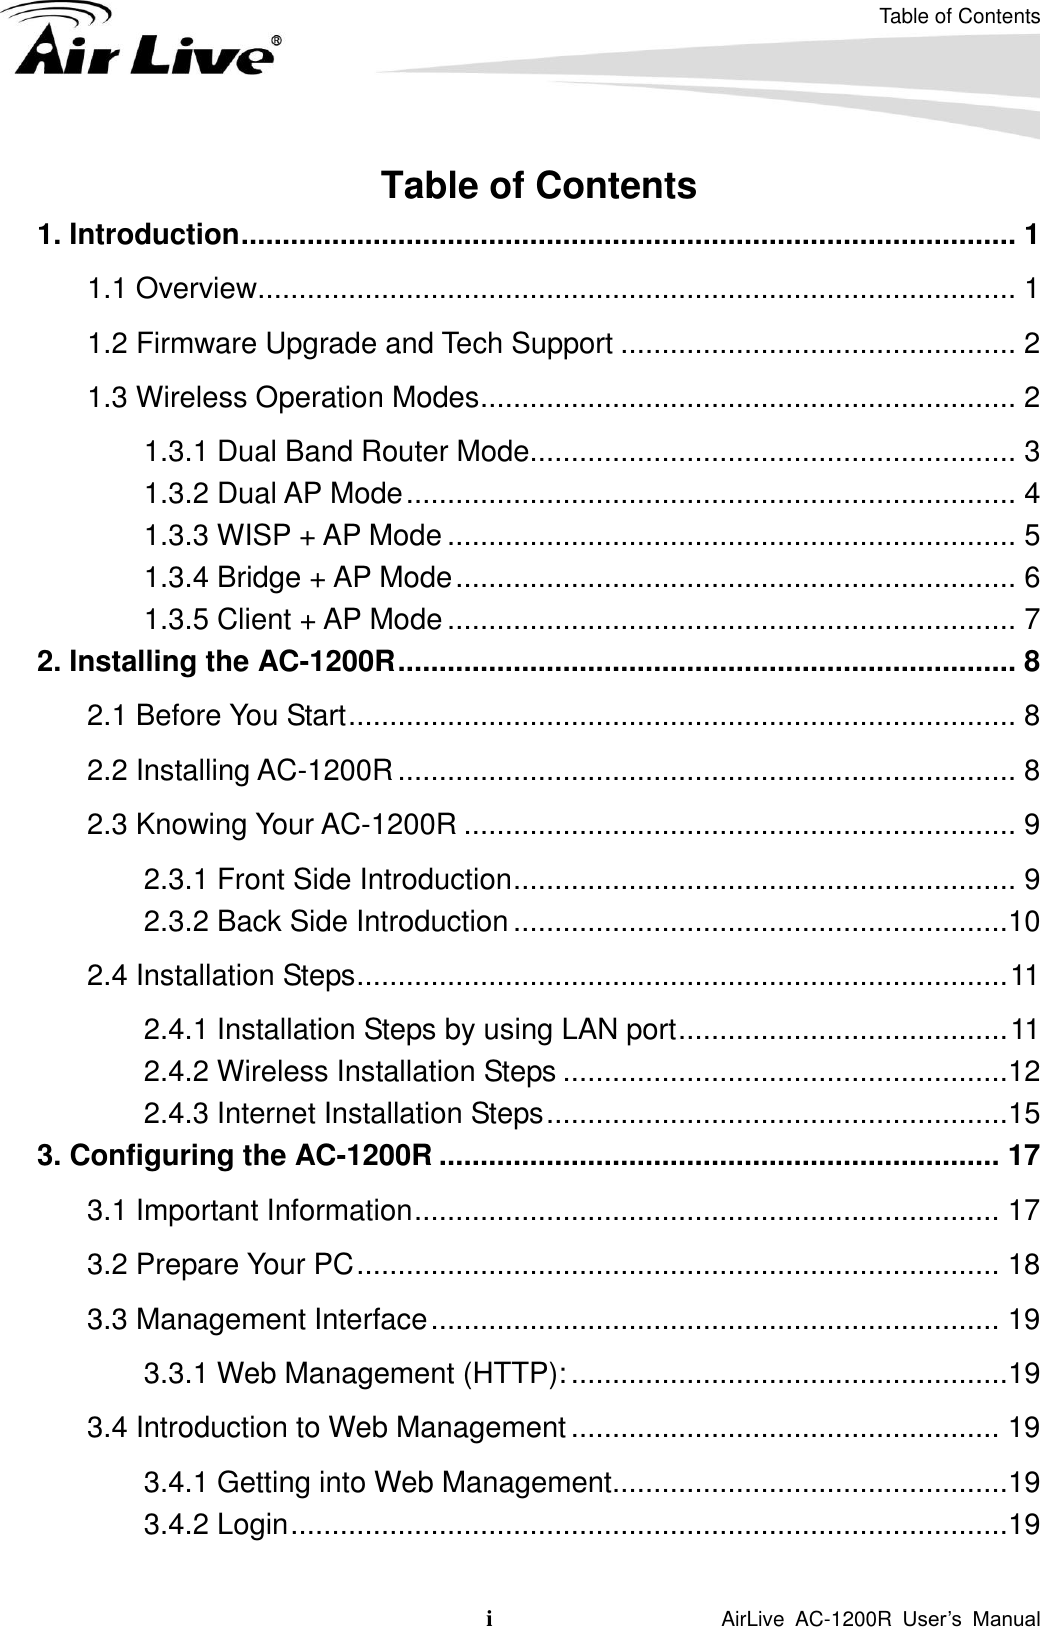 Table of Contents i                    AirLive  AC-1200R  User’s  Manual Table of Contents 1. Introduction .............................................................................................. 1 1.1 Overview............................................................................................ 1 1.2 Firmware Upgrade and Tech Support ................................................ 2 1.3 Wireless Operation Modes ................................................................. 2 1.3.1 Dual Band Router Mode........................................................... 3 1.3.2 Dual AP Mode .......................................................................... 4 1.3.3 WISP + AP Mode ..................................................................... 5 1.3.4 Bridge + AP Mode .................................................................... 6 1.3.5 Client + AP Mode ..................................................................... 7 2. Installing the AC-1200R ........................................................................... 8 2.1 Before You Start ................................................................................. 8 2.2 Installing AC-1200R ........................................................................... 8 2.3 Knowing Your AC-1200R ................................................................... 9 2.3.1 Front Side Introduction ............................................................. 9 2.3.2 Back Side Introduction ............................................................10 2.4 Installation Steps ............................................................................... 11 2.4.1 Installation Steps by using LAN port ........................................ 11 2.4.2 Wireless Installation Steps ......................................................12 2.4.3 Internet Installation Steps ........................................................15 3. Configuring the AC-1200R .................................................................... 17 3.1 Important Information ....................................................................... 17 3.2 Prepare Your PC .............................................................................. 18 3.3 Management Interface ..................................................................... 19 3.3.1 Web Management (HTTP): .....................................................19 3.4 Introduction to Web Management .................................................... 19 3.4.1 Getting into Web Management ................................................19 3.4.2 Login .......................................................................................19 